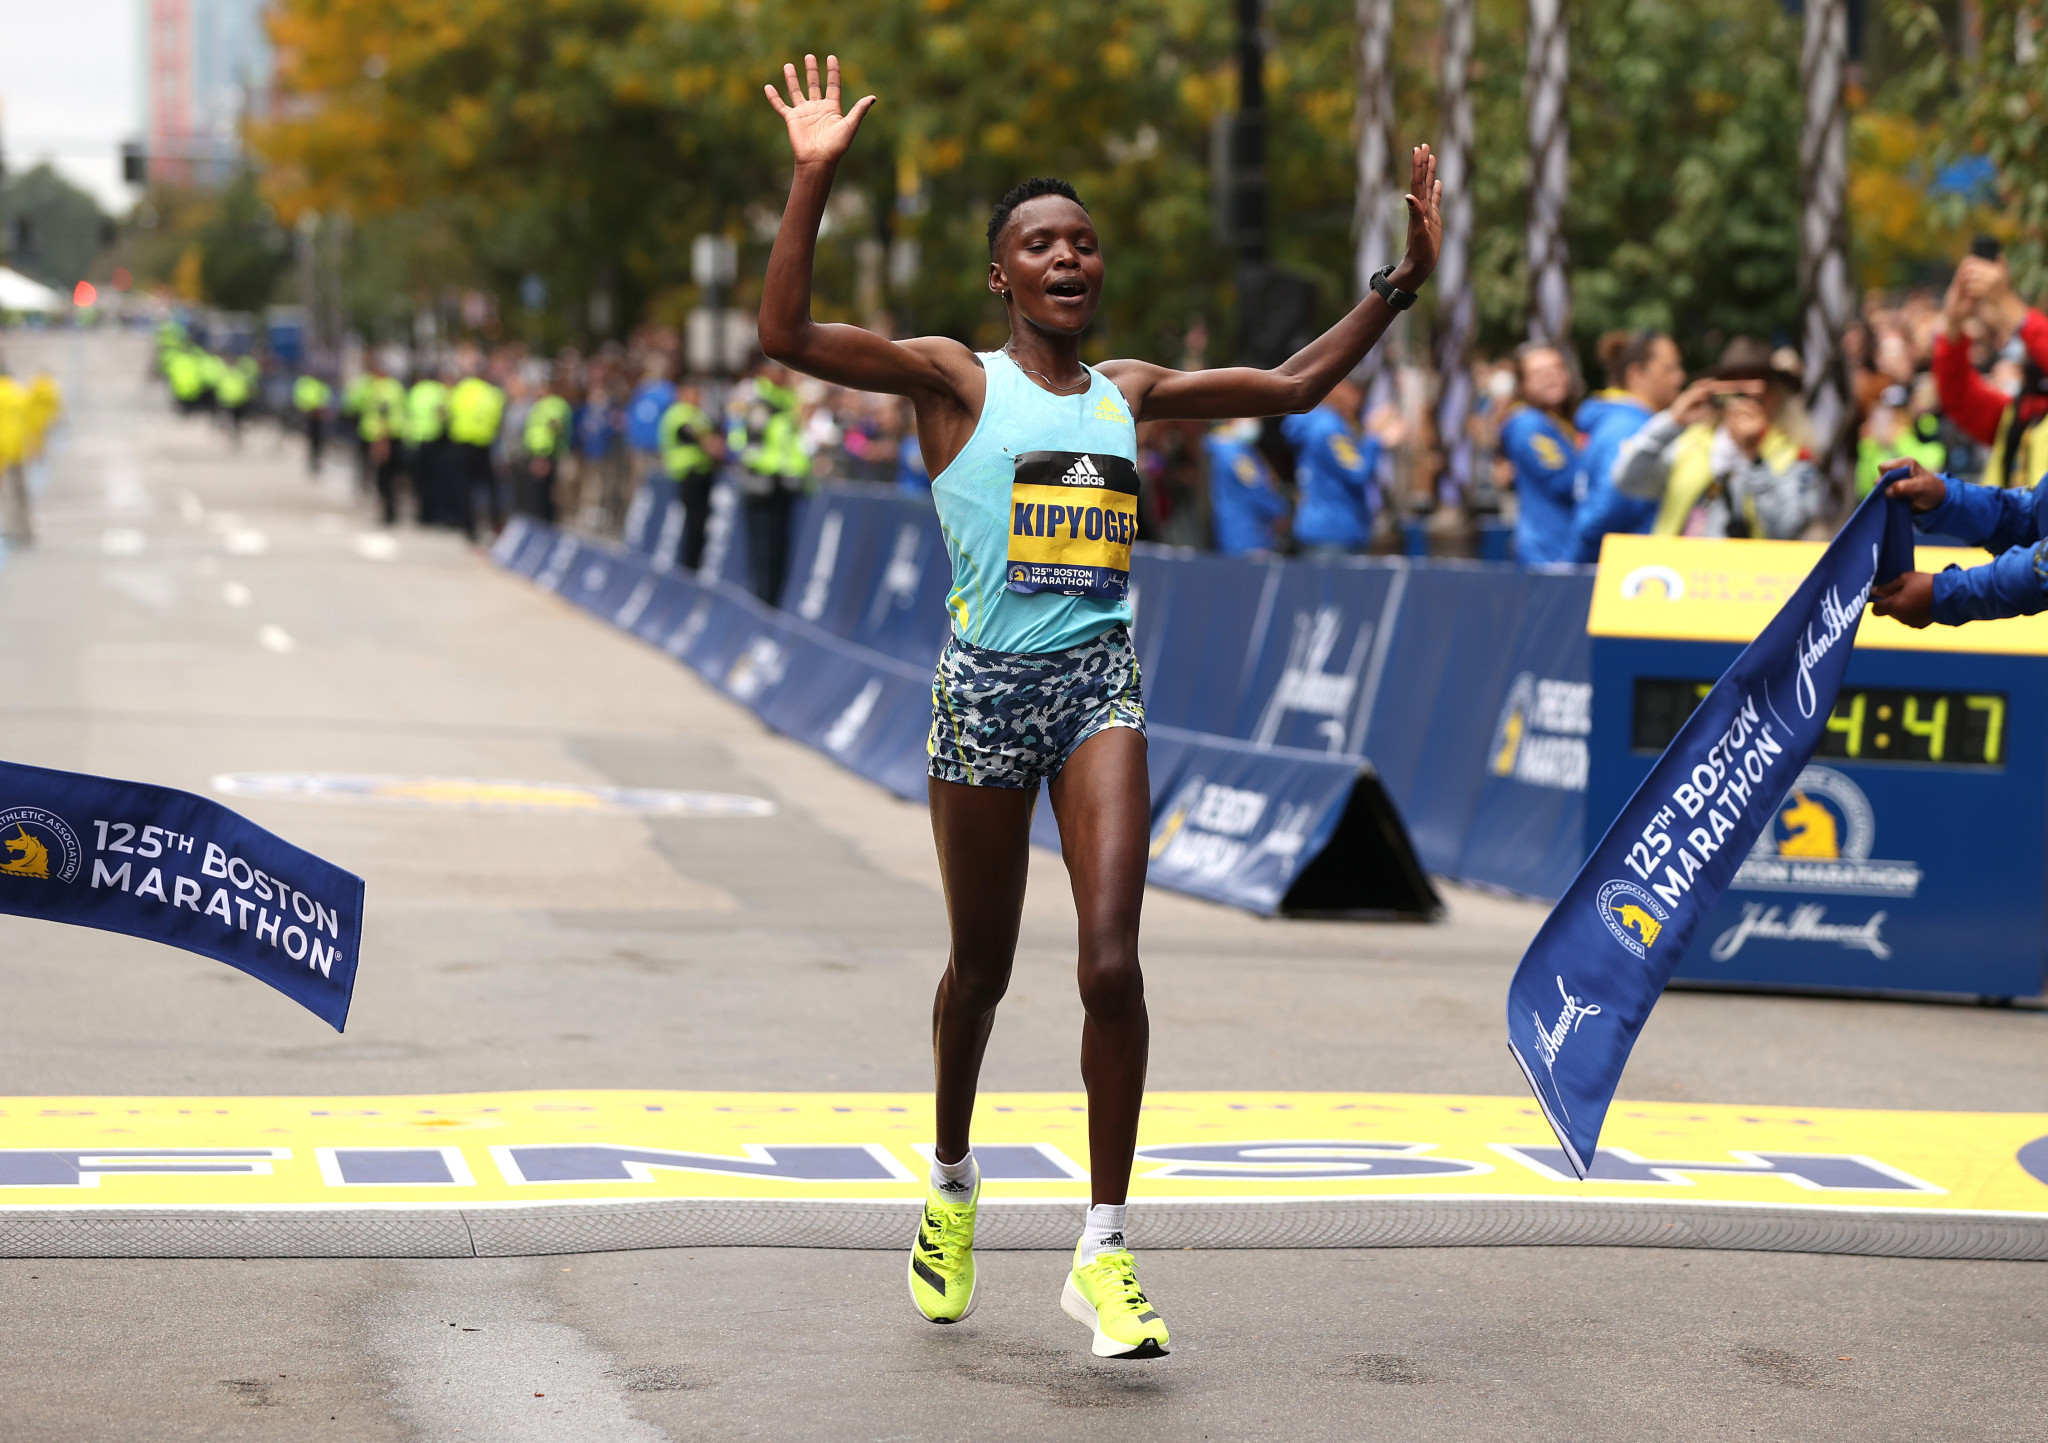 Boston Marathon winner Diana Kipyokei has been provisionally suspended by the Athletics Integrity Unit ©Getty Images